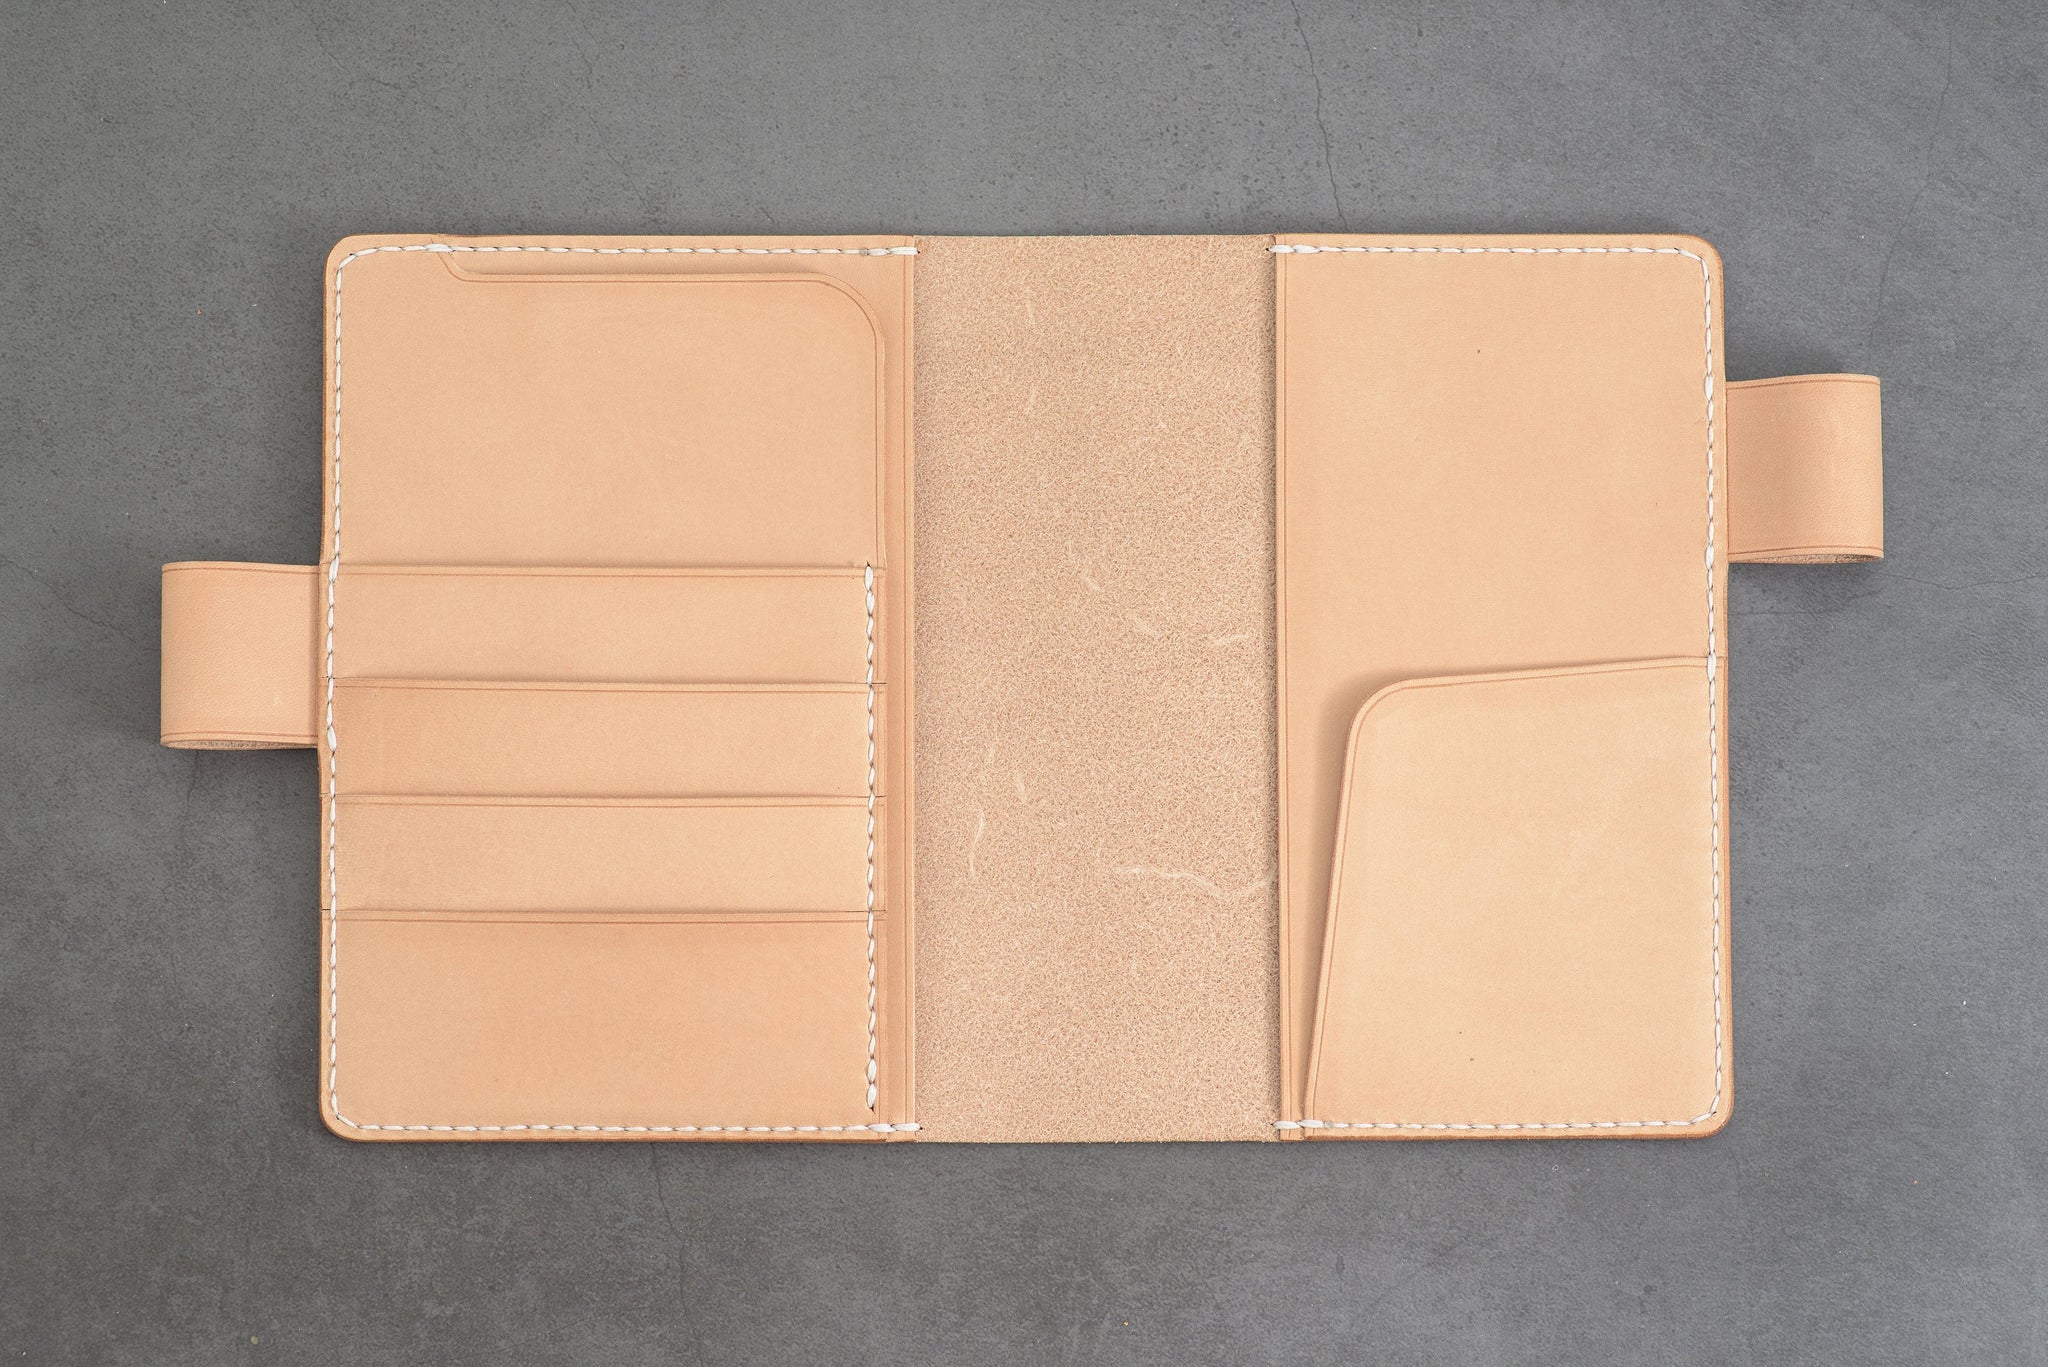 A6/Hobonichi/Midori MD Natural Leather Notebook Cover with card pocket ...